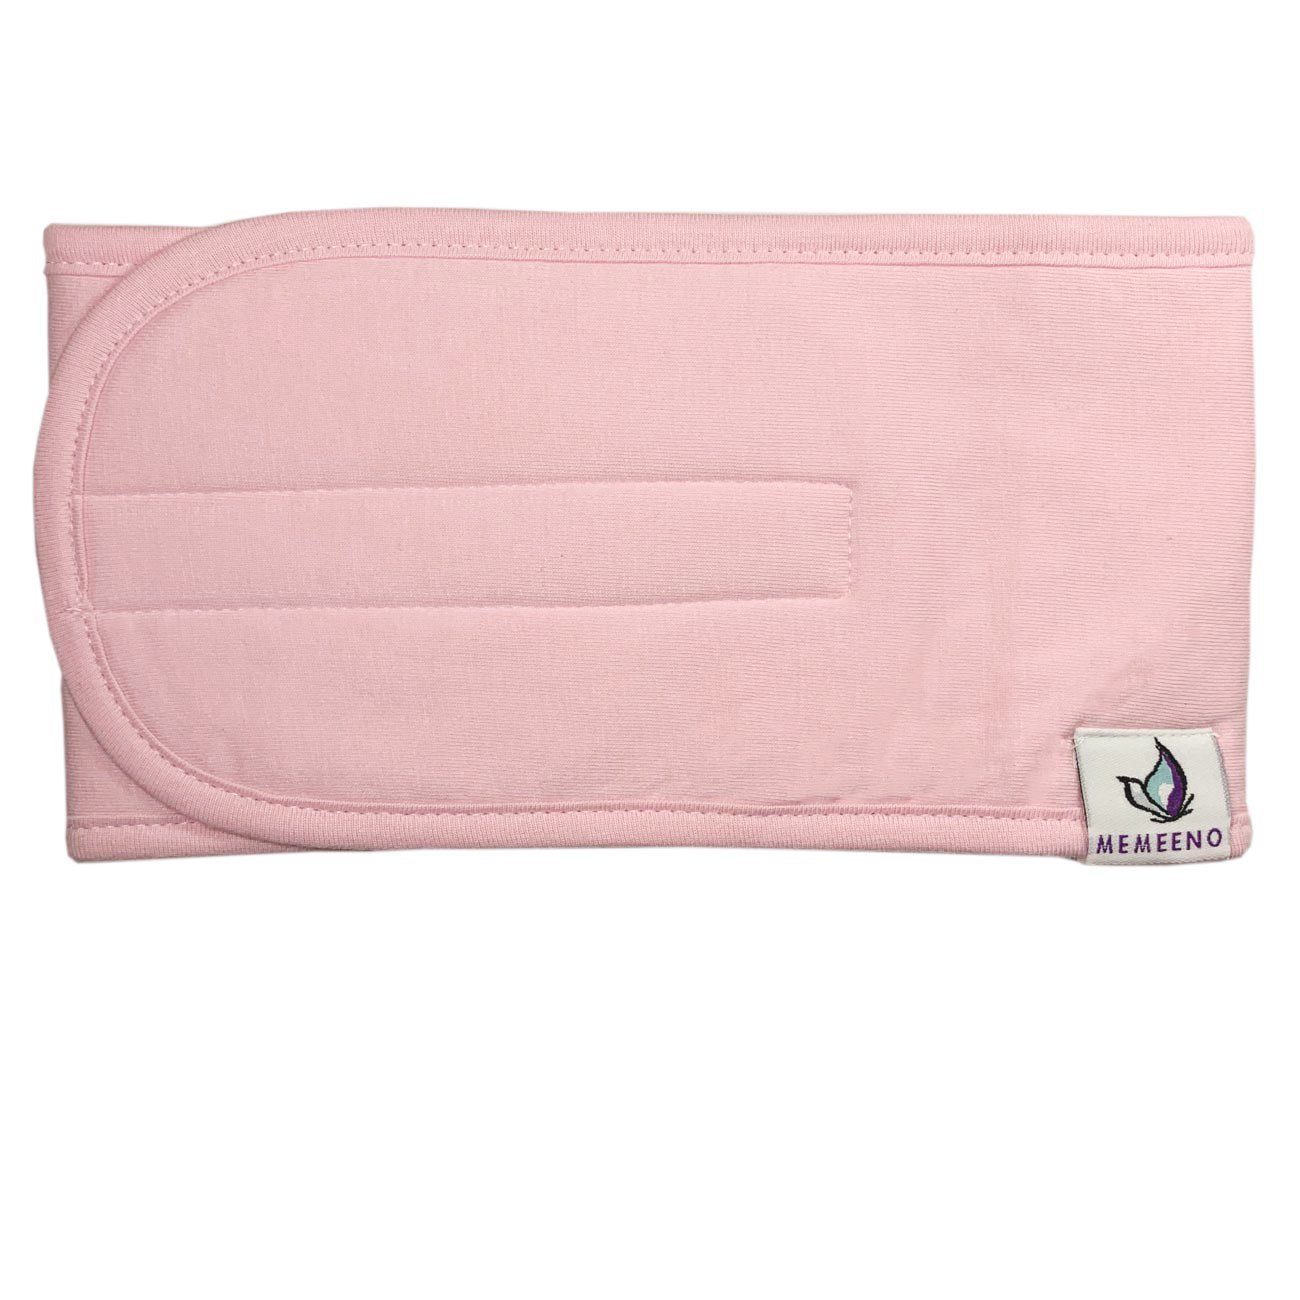 memeeno belly band for gas, colic relief organic cotton pink sweet pea